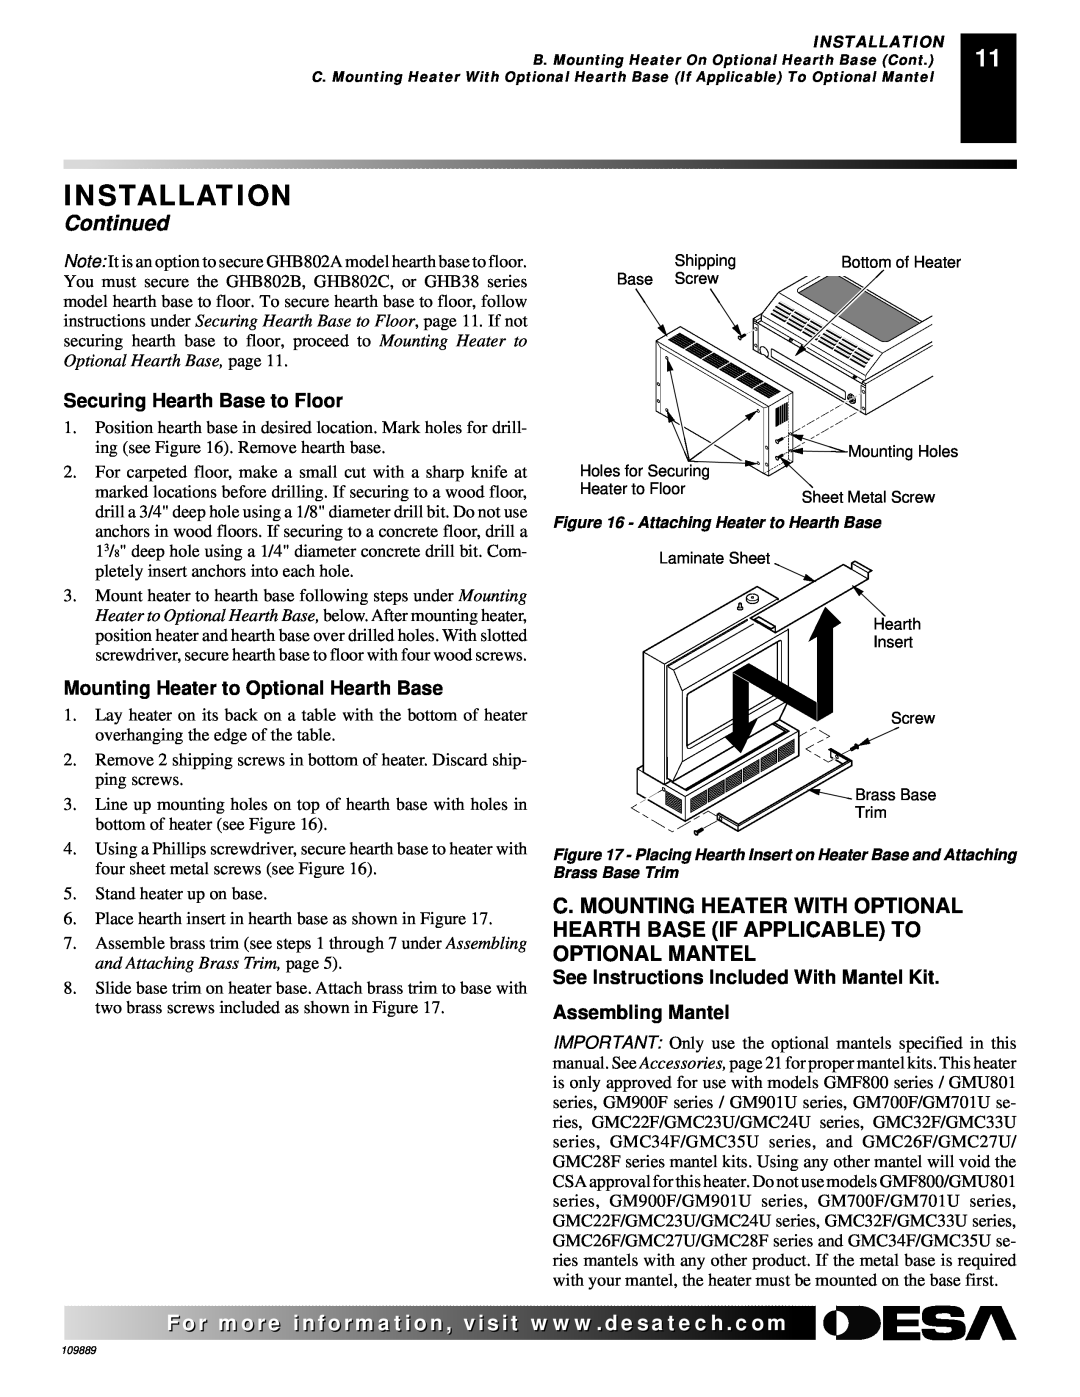 Desa VMH3000TPA Securing Hearth Base to Floor, Mounting Heater to Optional Hearth Base, Assembling Mantel, Installation 